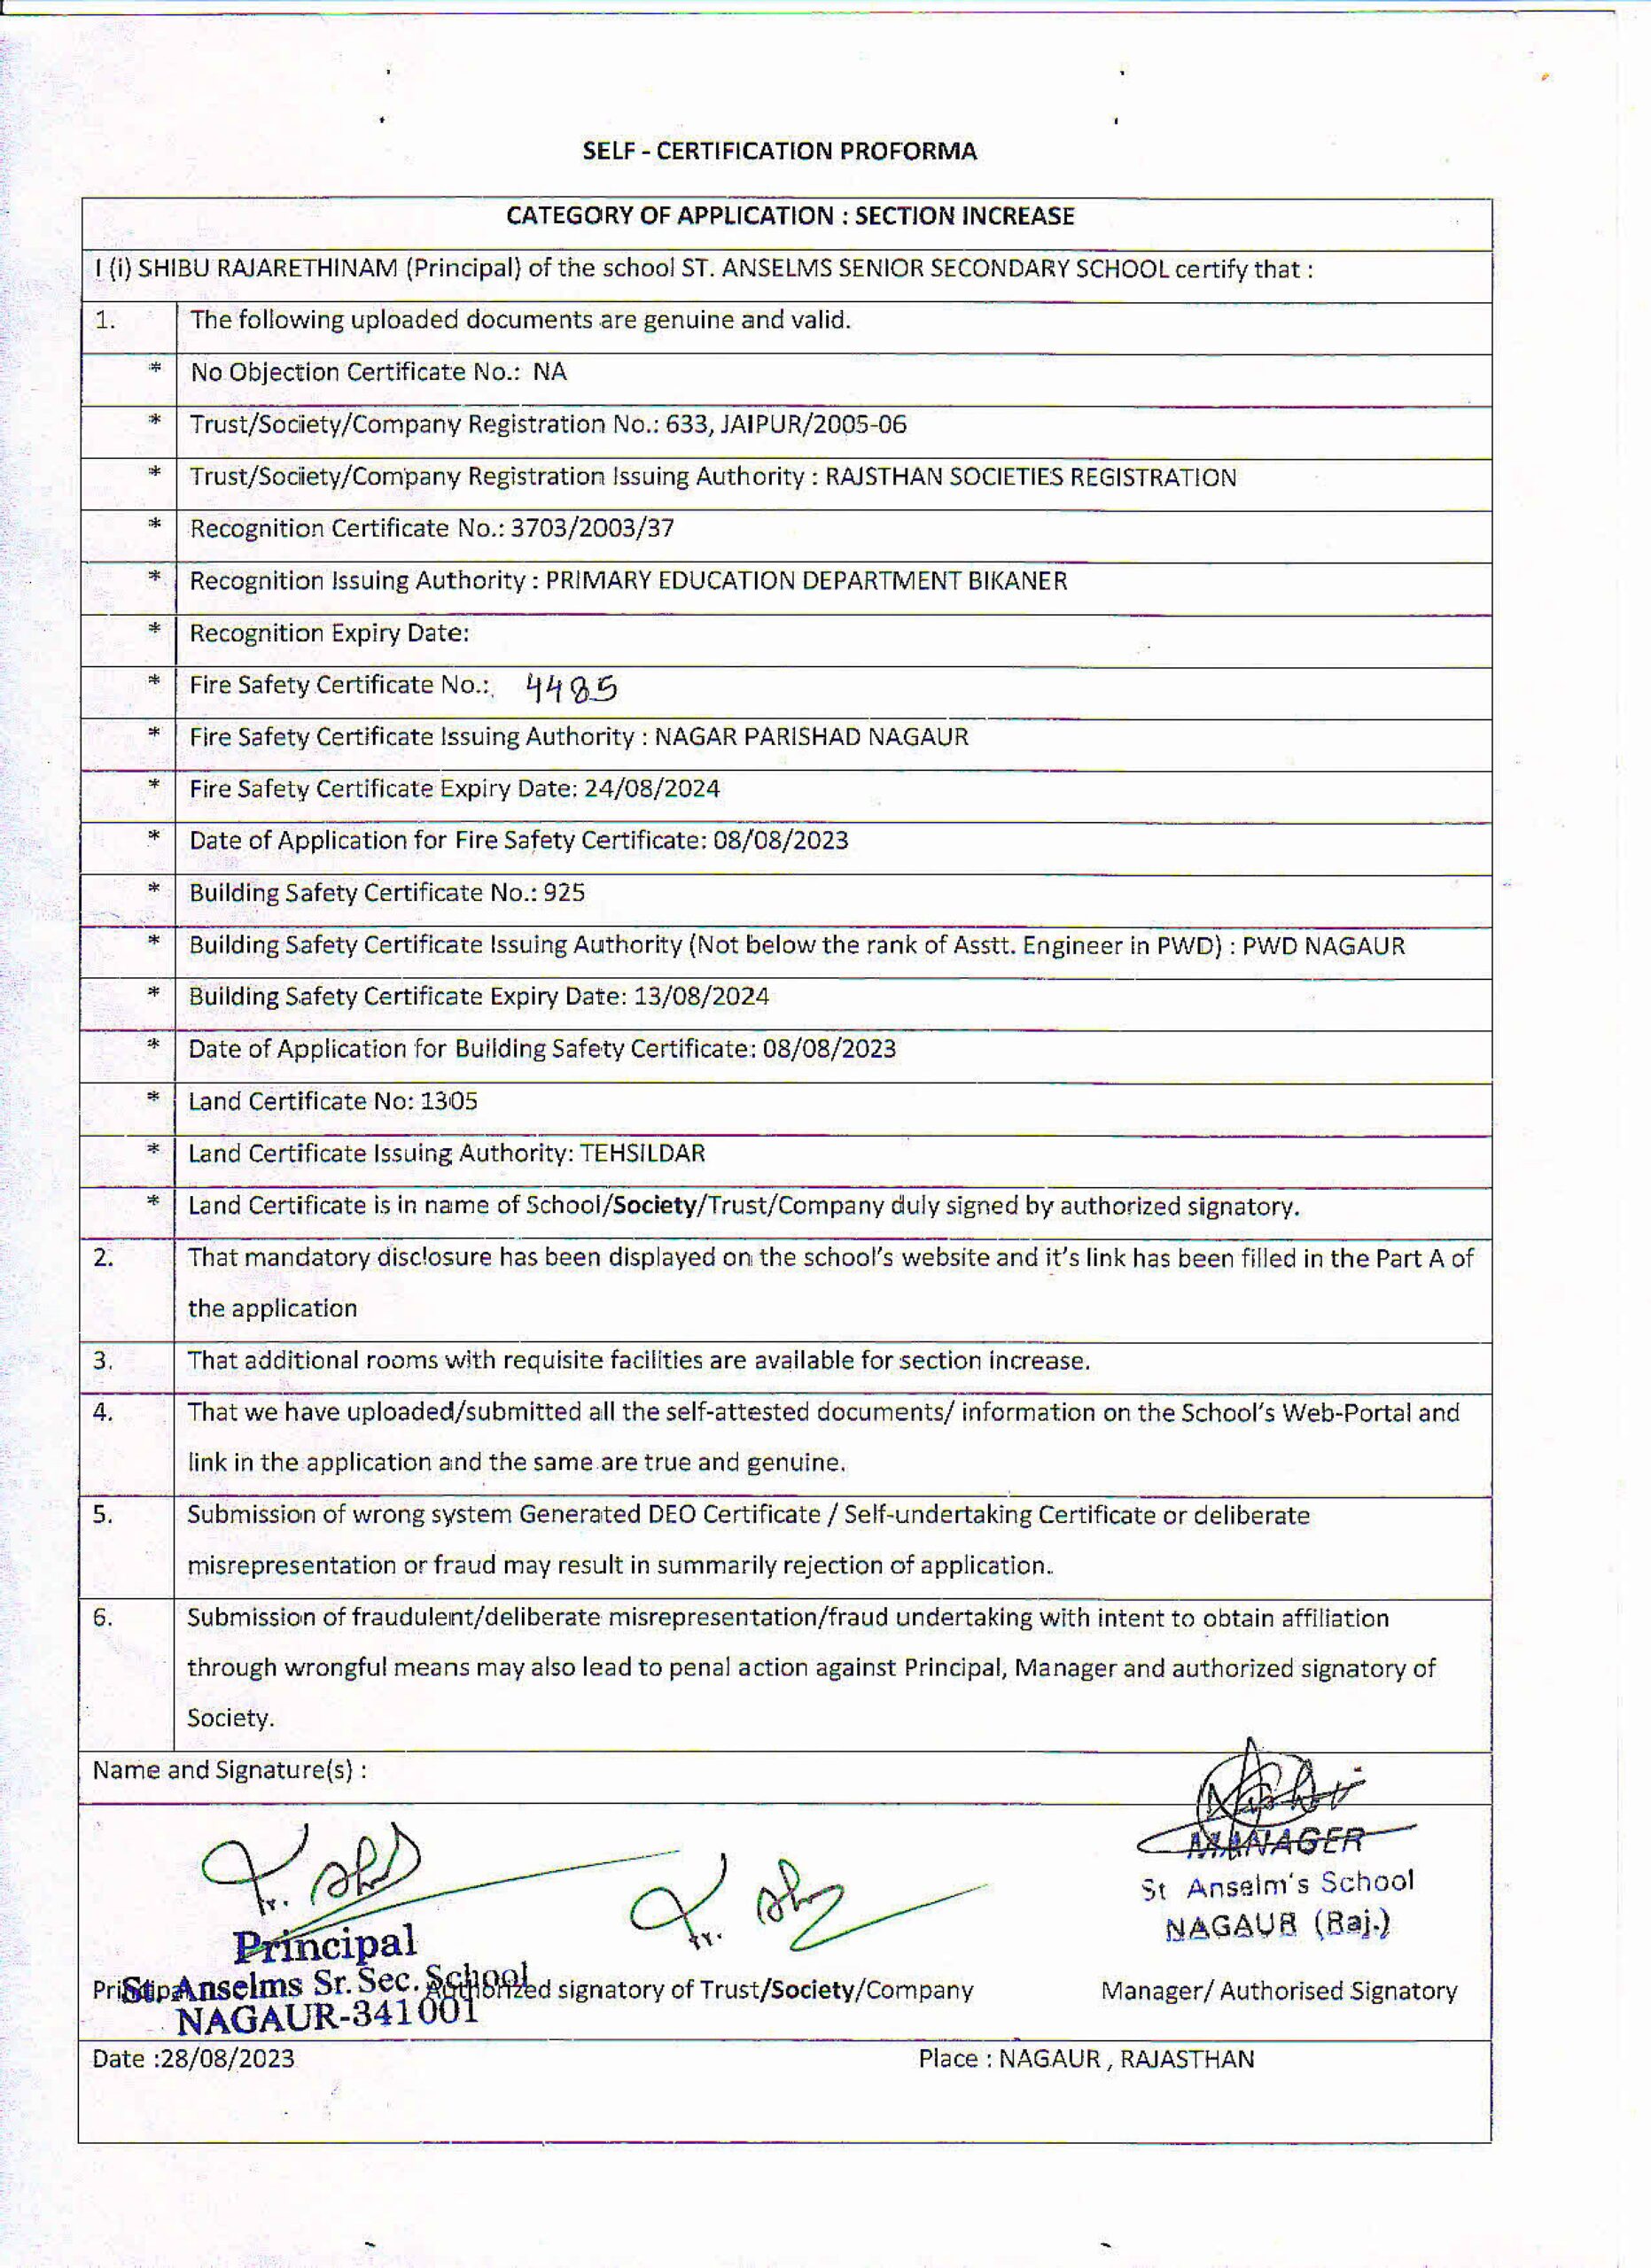 SELF_CERTIFICATION_PROFORMA-page-001